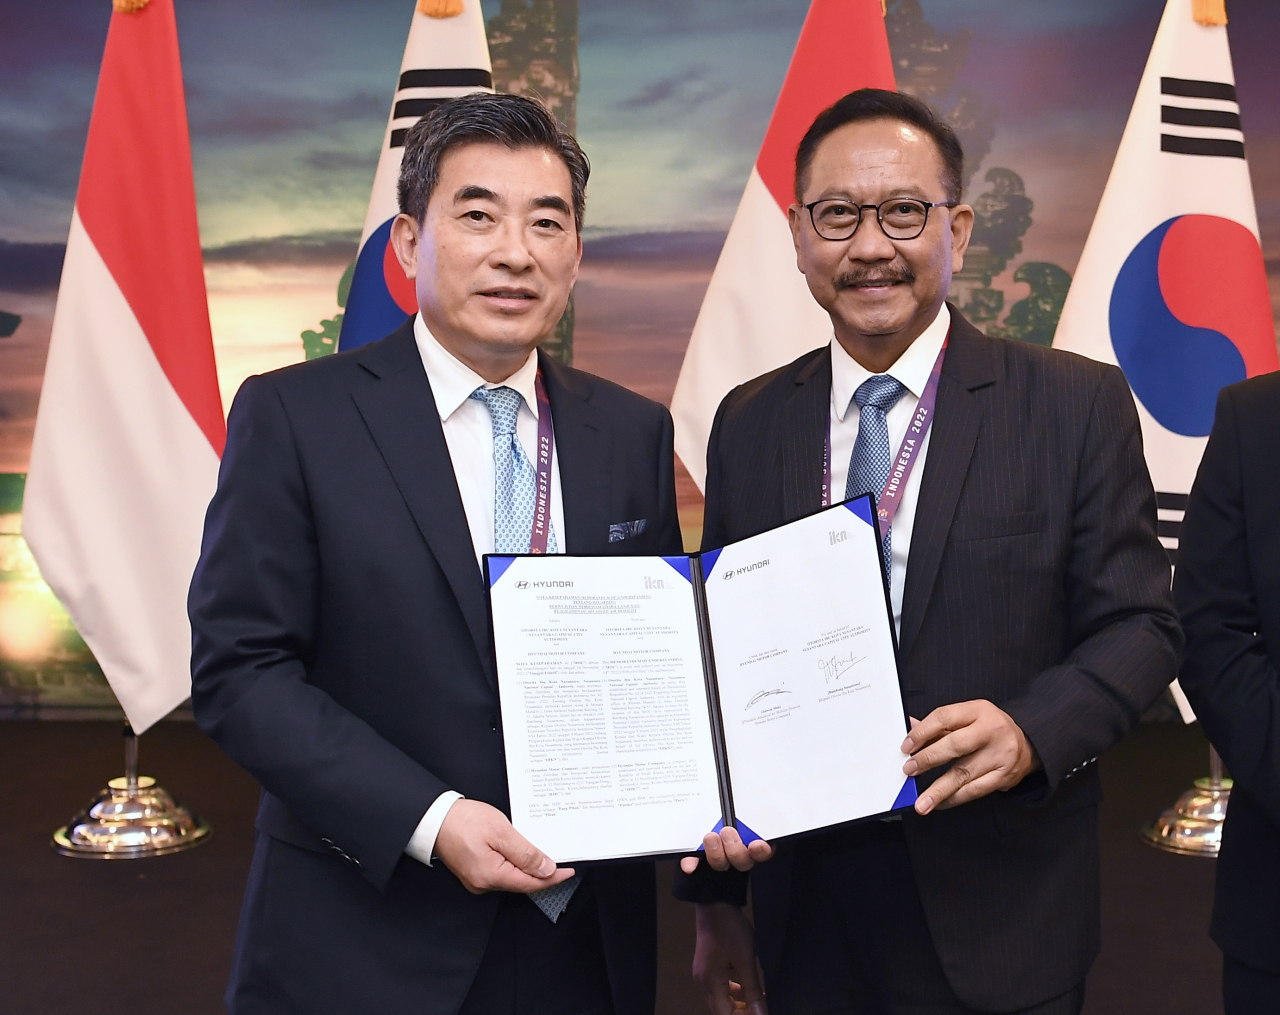 Hyundai Motor Group President Shin Jae-won (left) and Head of the Nusantara National Capital Authority Bambang Susantono (right) pose for a photo after signing a memorandum of understanding to build an ecosystem for advanced air mobility (AAM) in Indonesia's new capital city of Nusantara, during B-20 Summit Indonesia 2022 Bali, Indonesia, Monday. (Hyundai Motor Group)